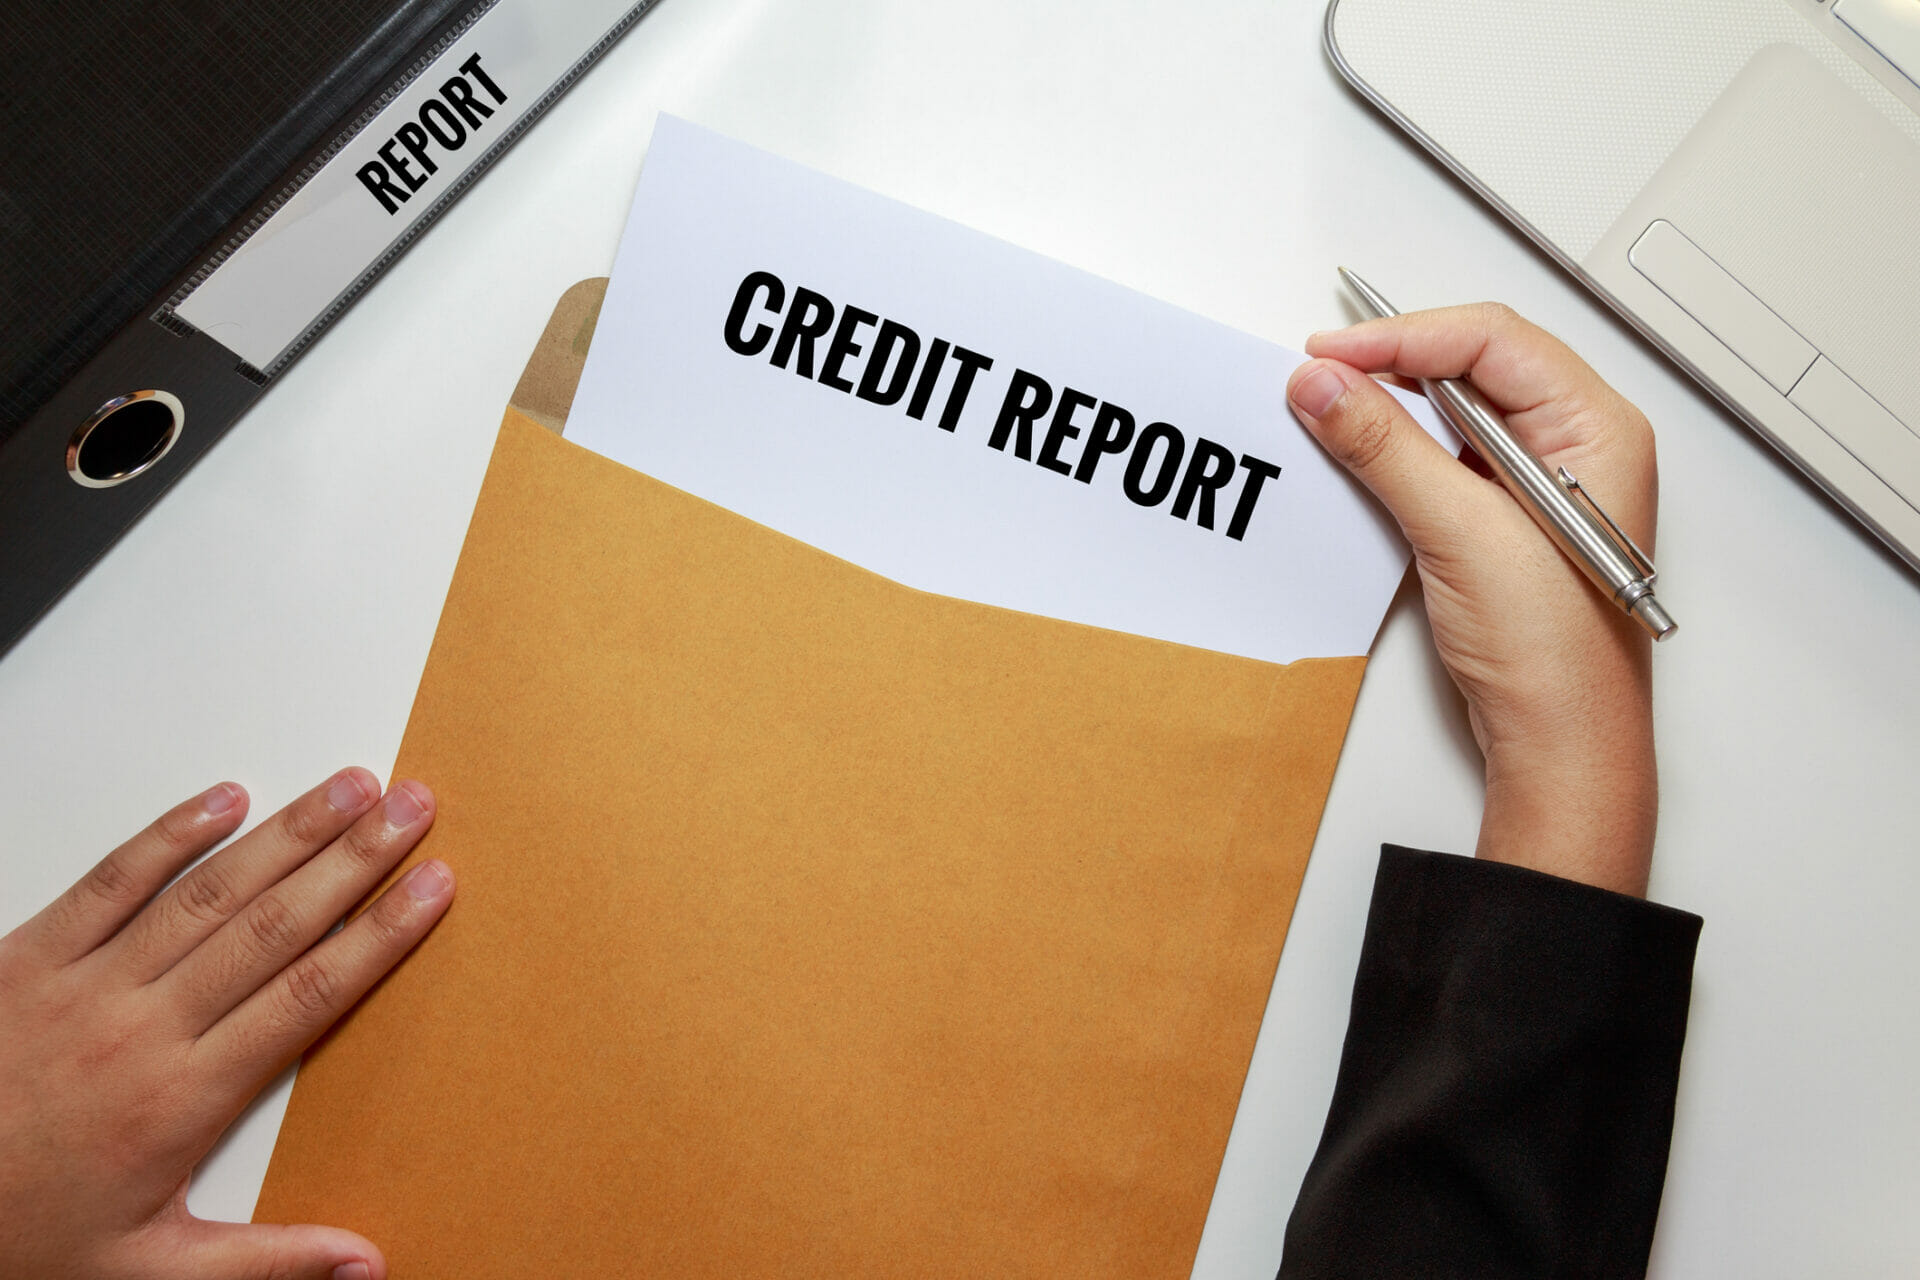 Credit report in an envelope opened by a man